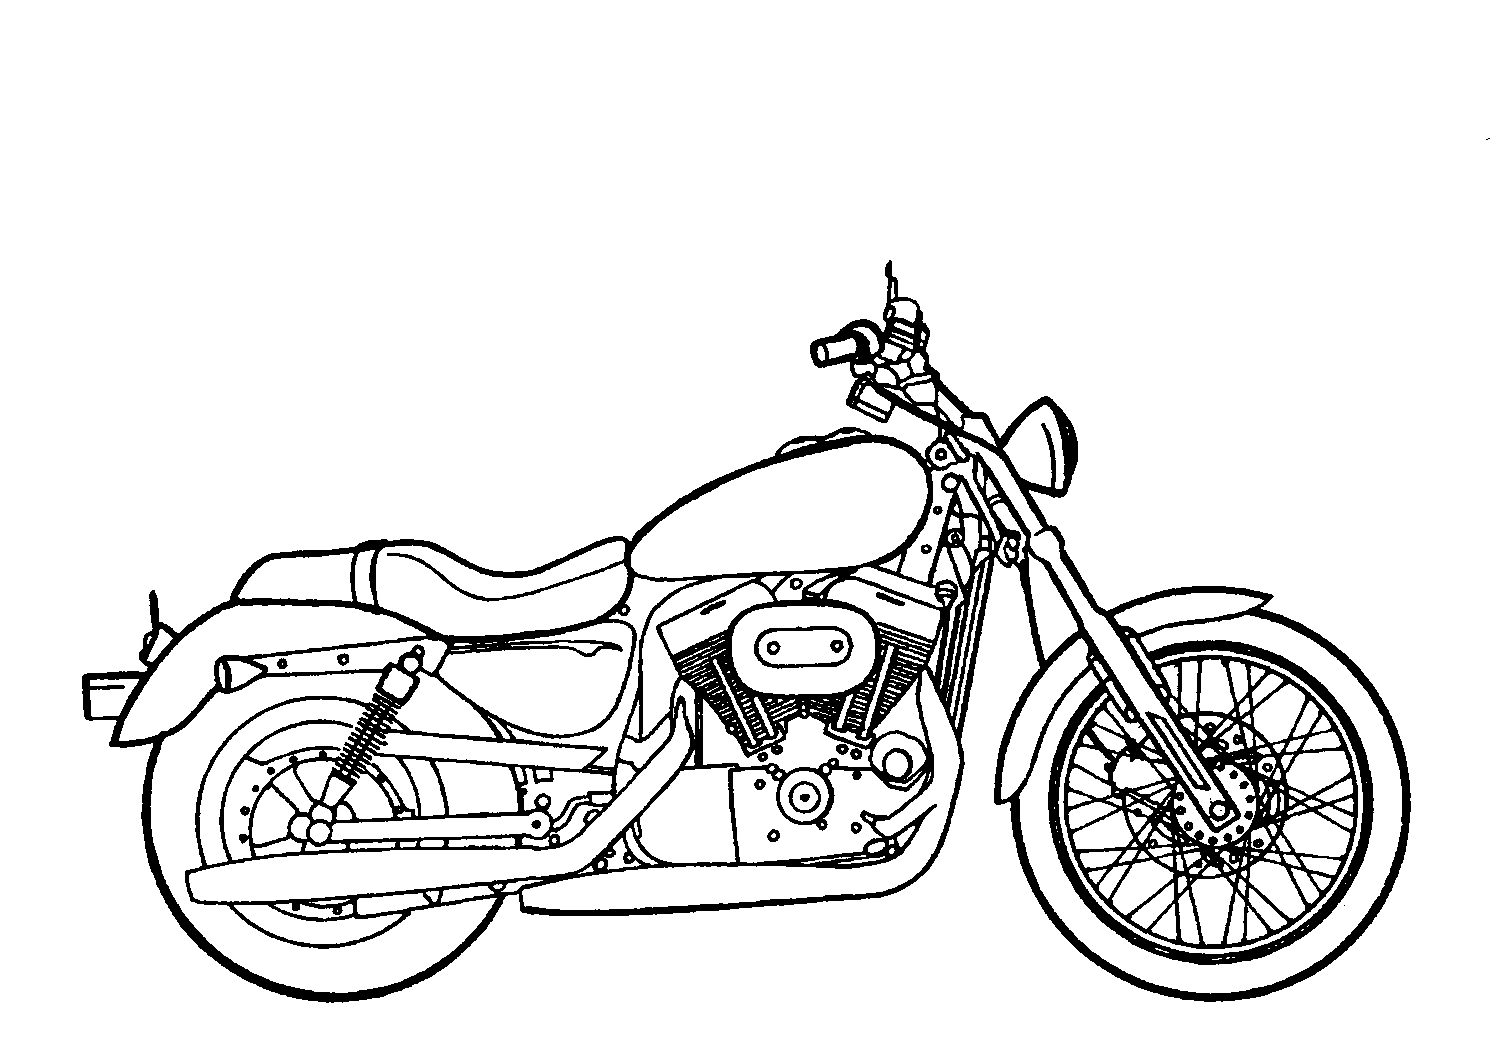 Pencil Black And White Wallpaper Free Motorcycle Coloring Page